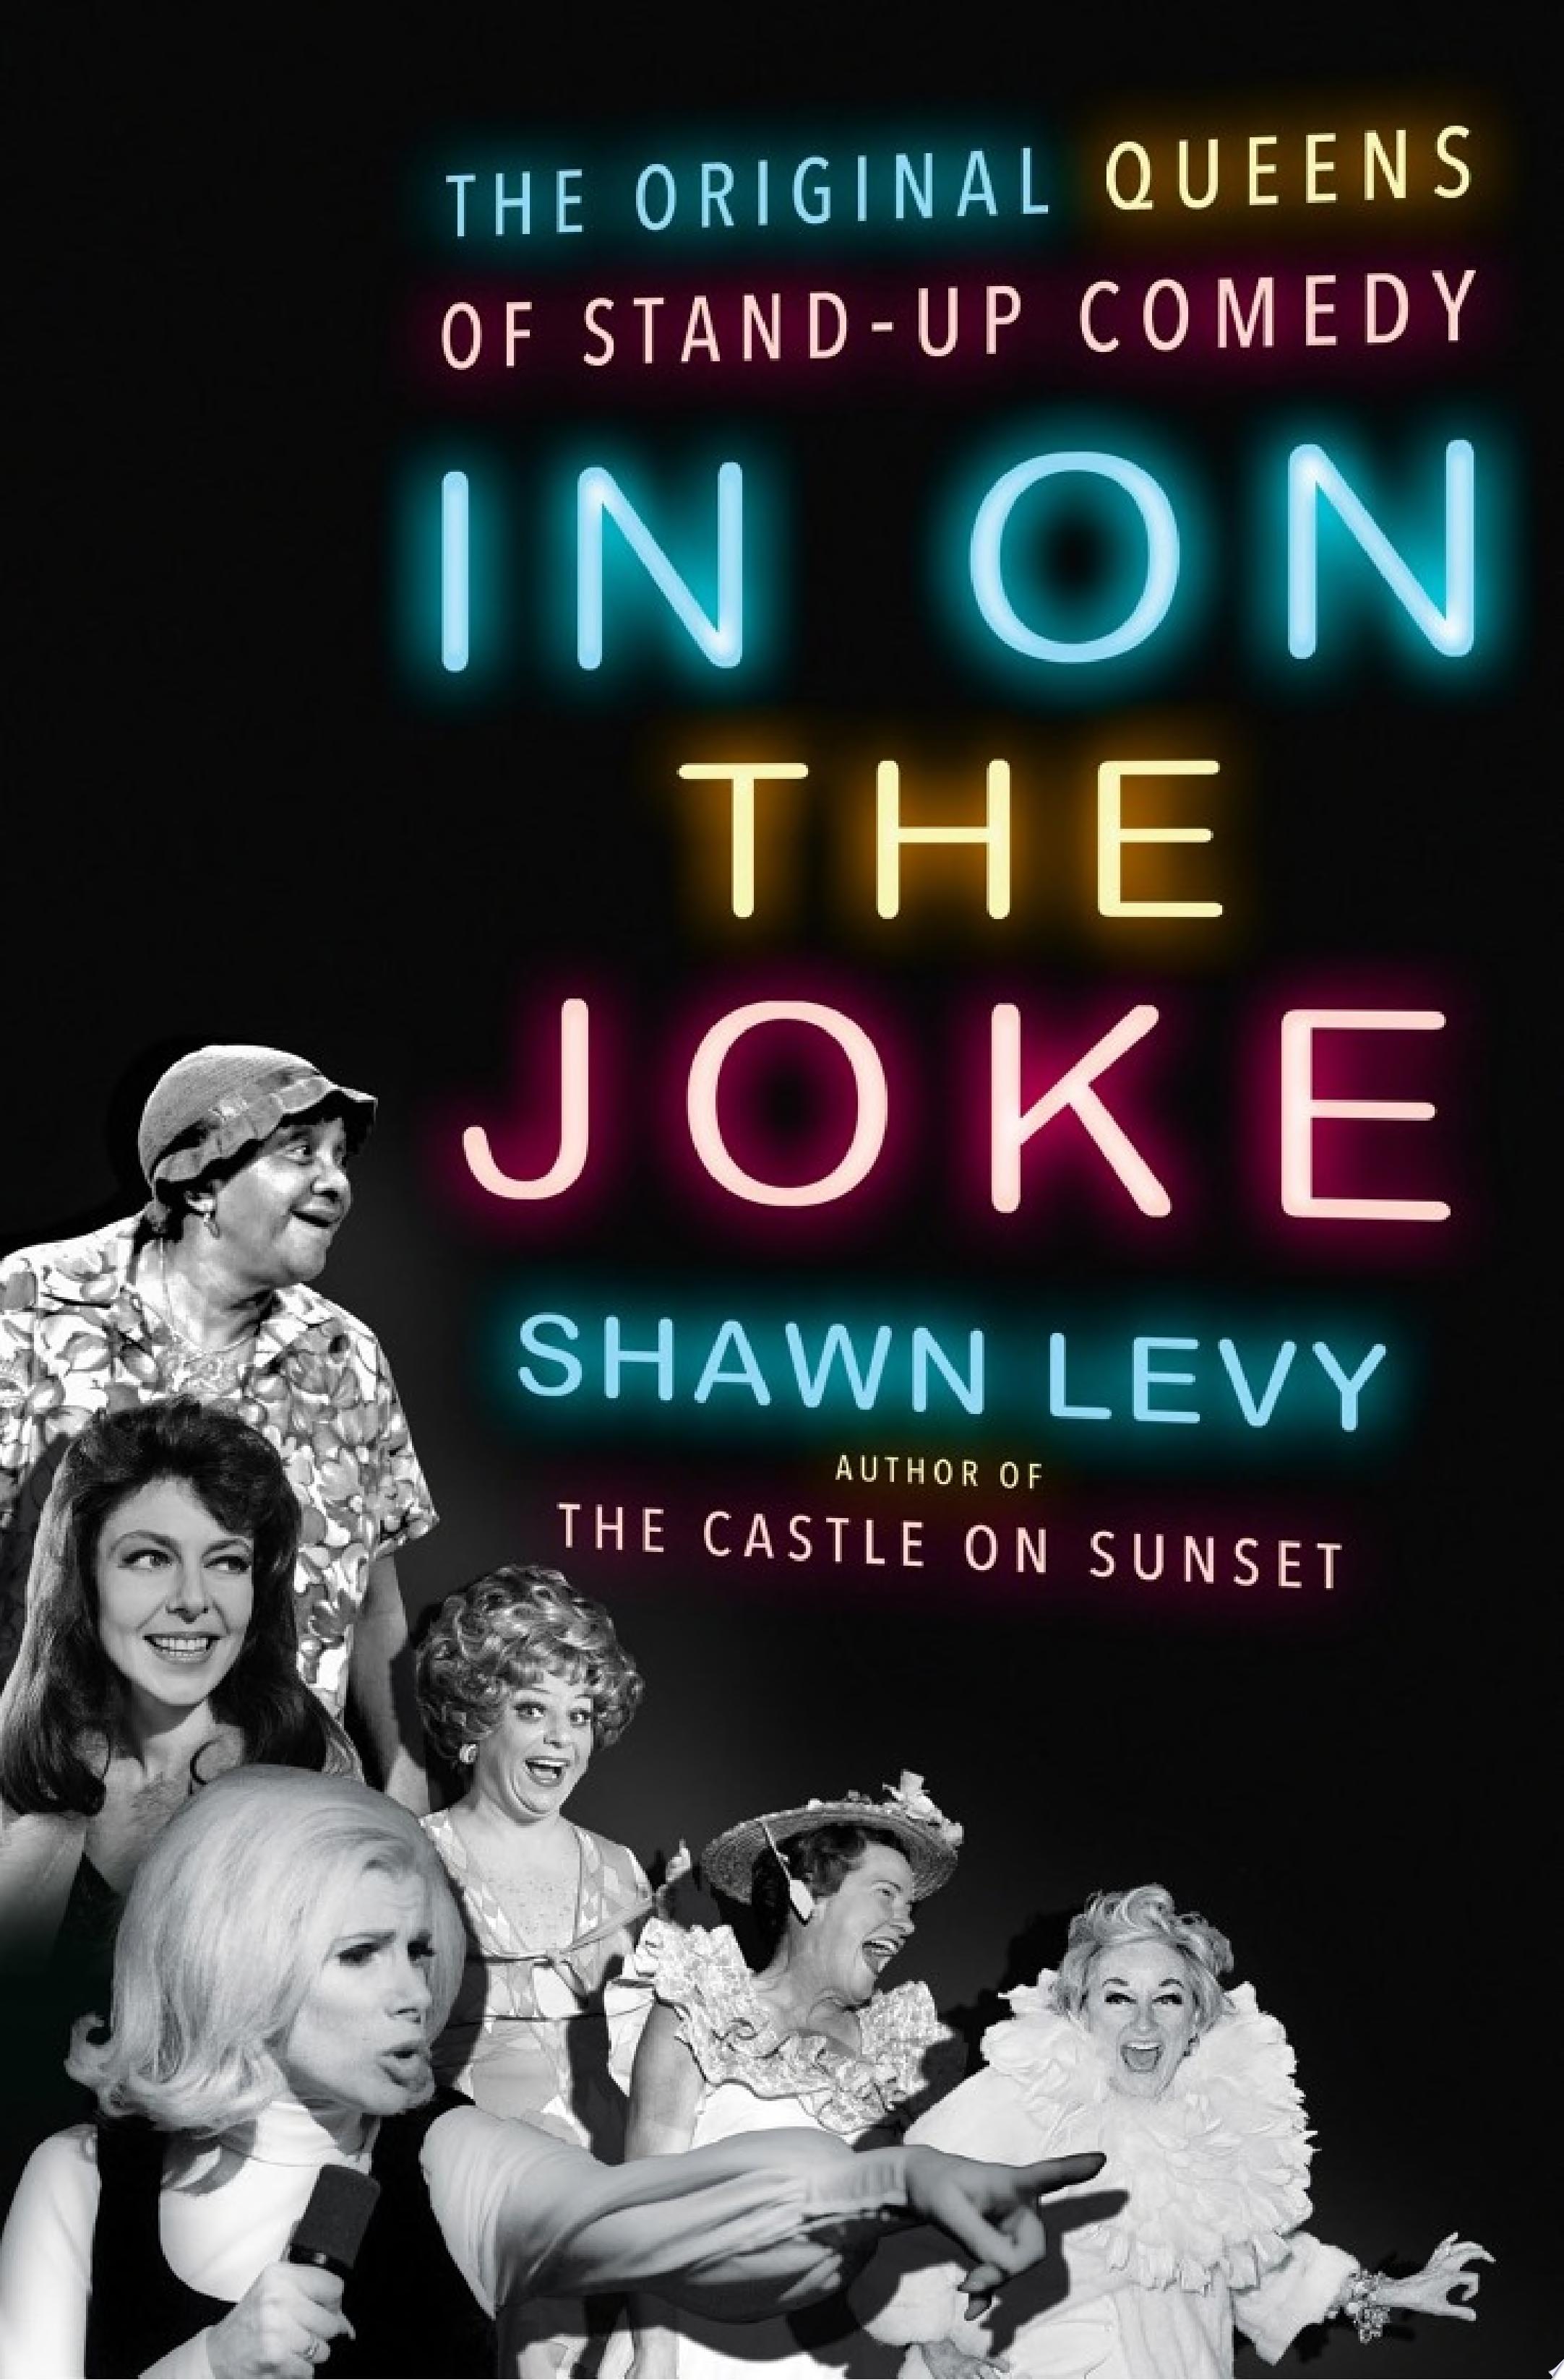 Image for "In On the Joke"